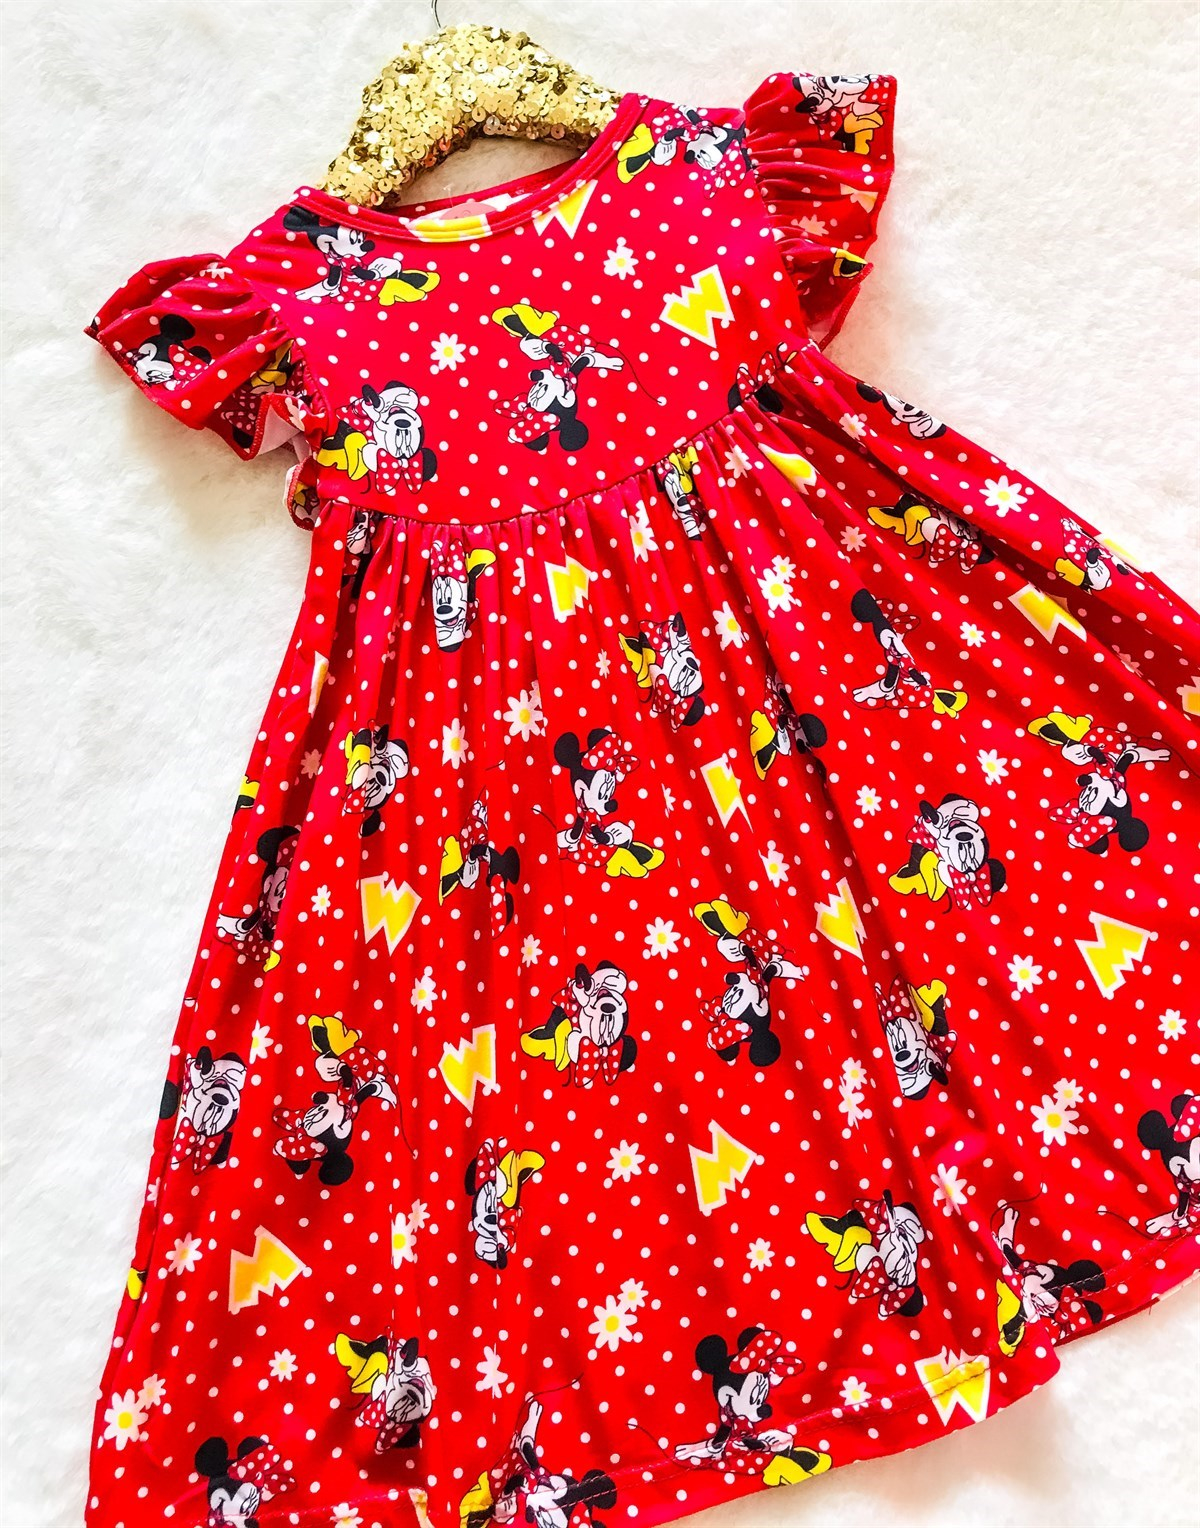 Girls Fun Character Dresses - Red Minnie - polka dots, daisies, large yellow M's